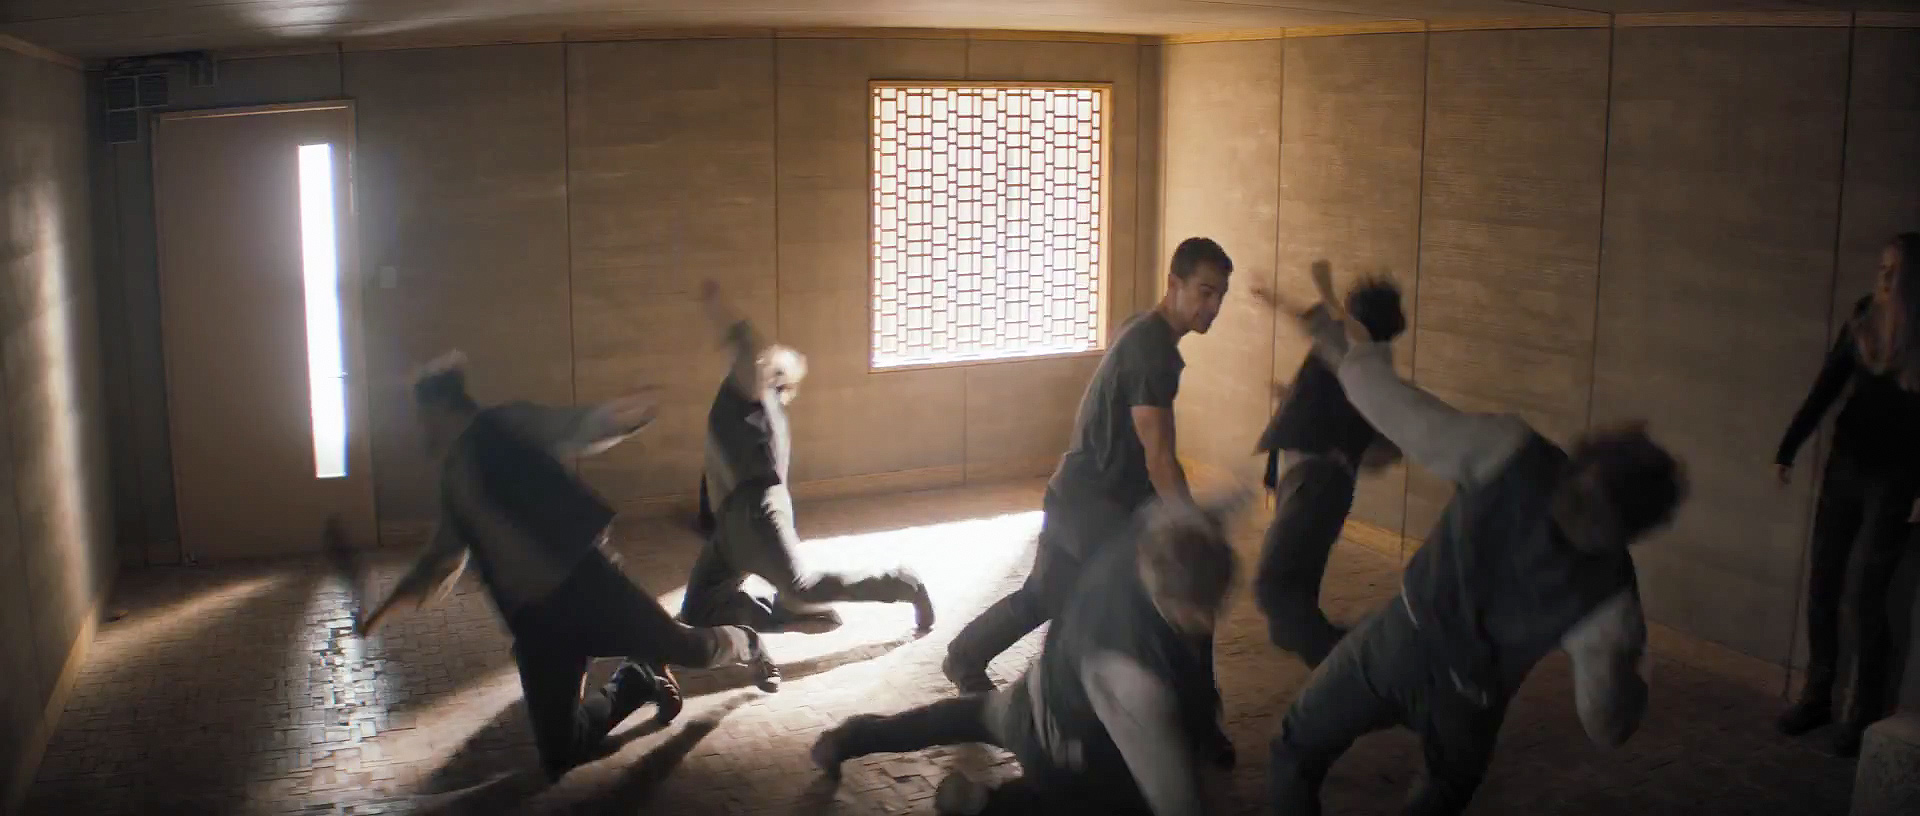 first-official-footage-from-the-futuristic-action-film-divergent-8.jpg